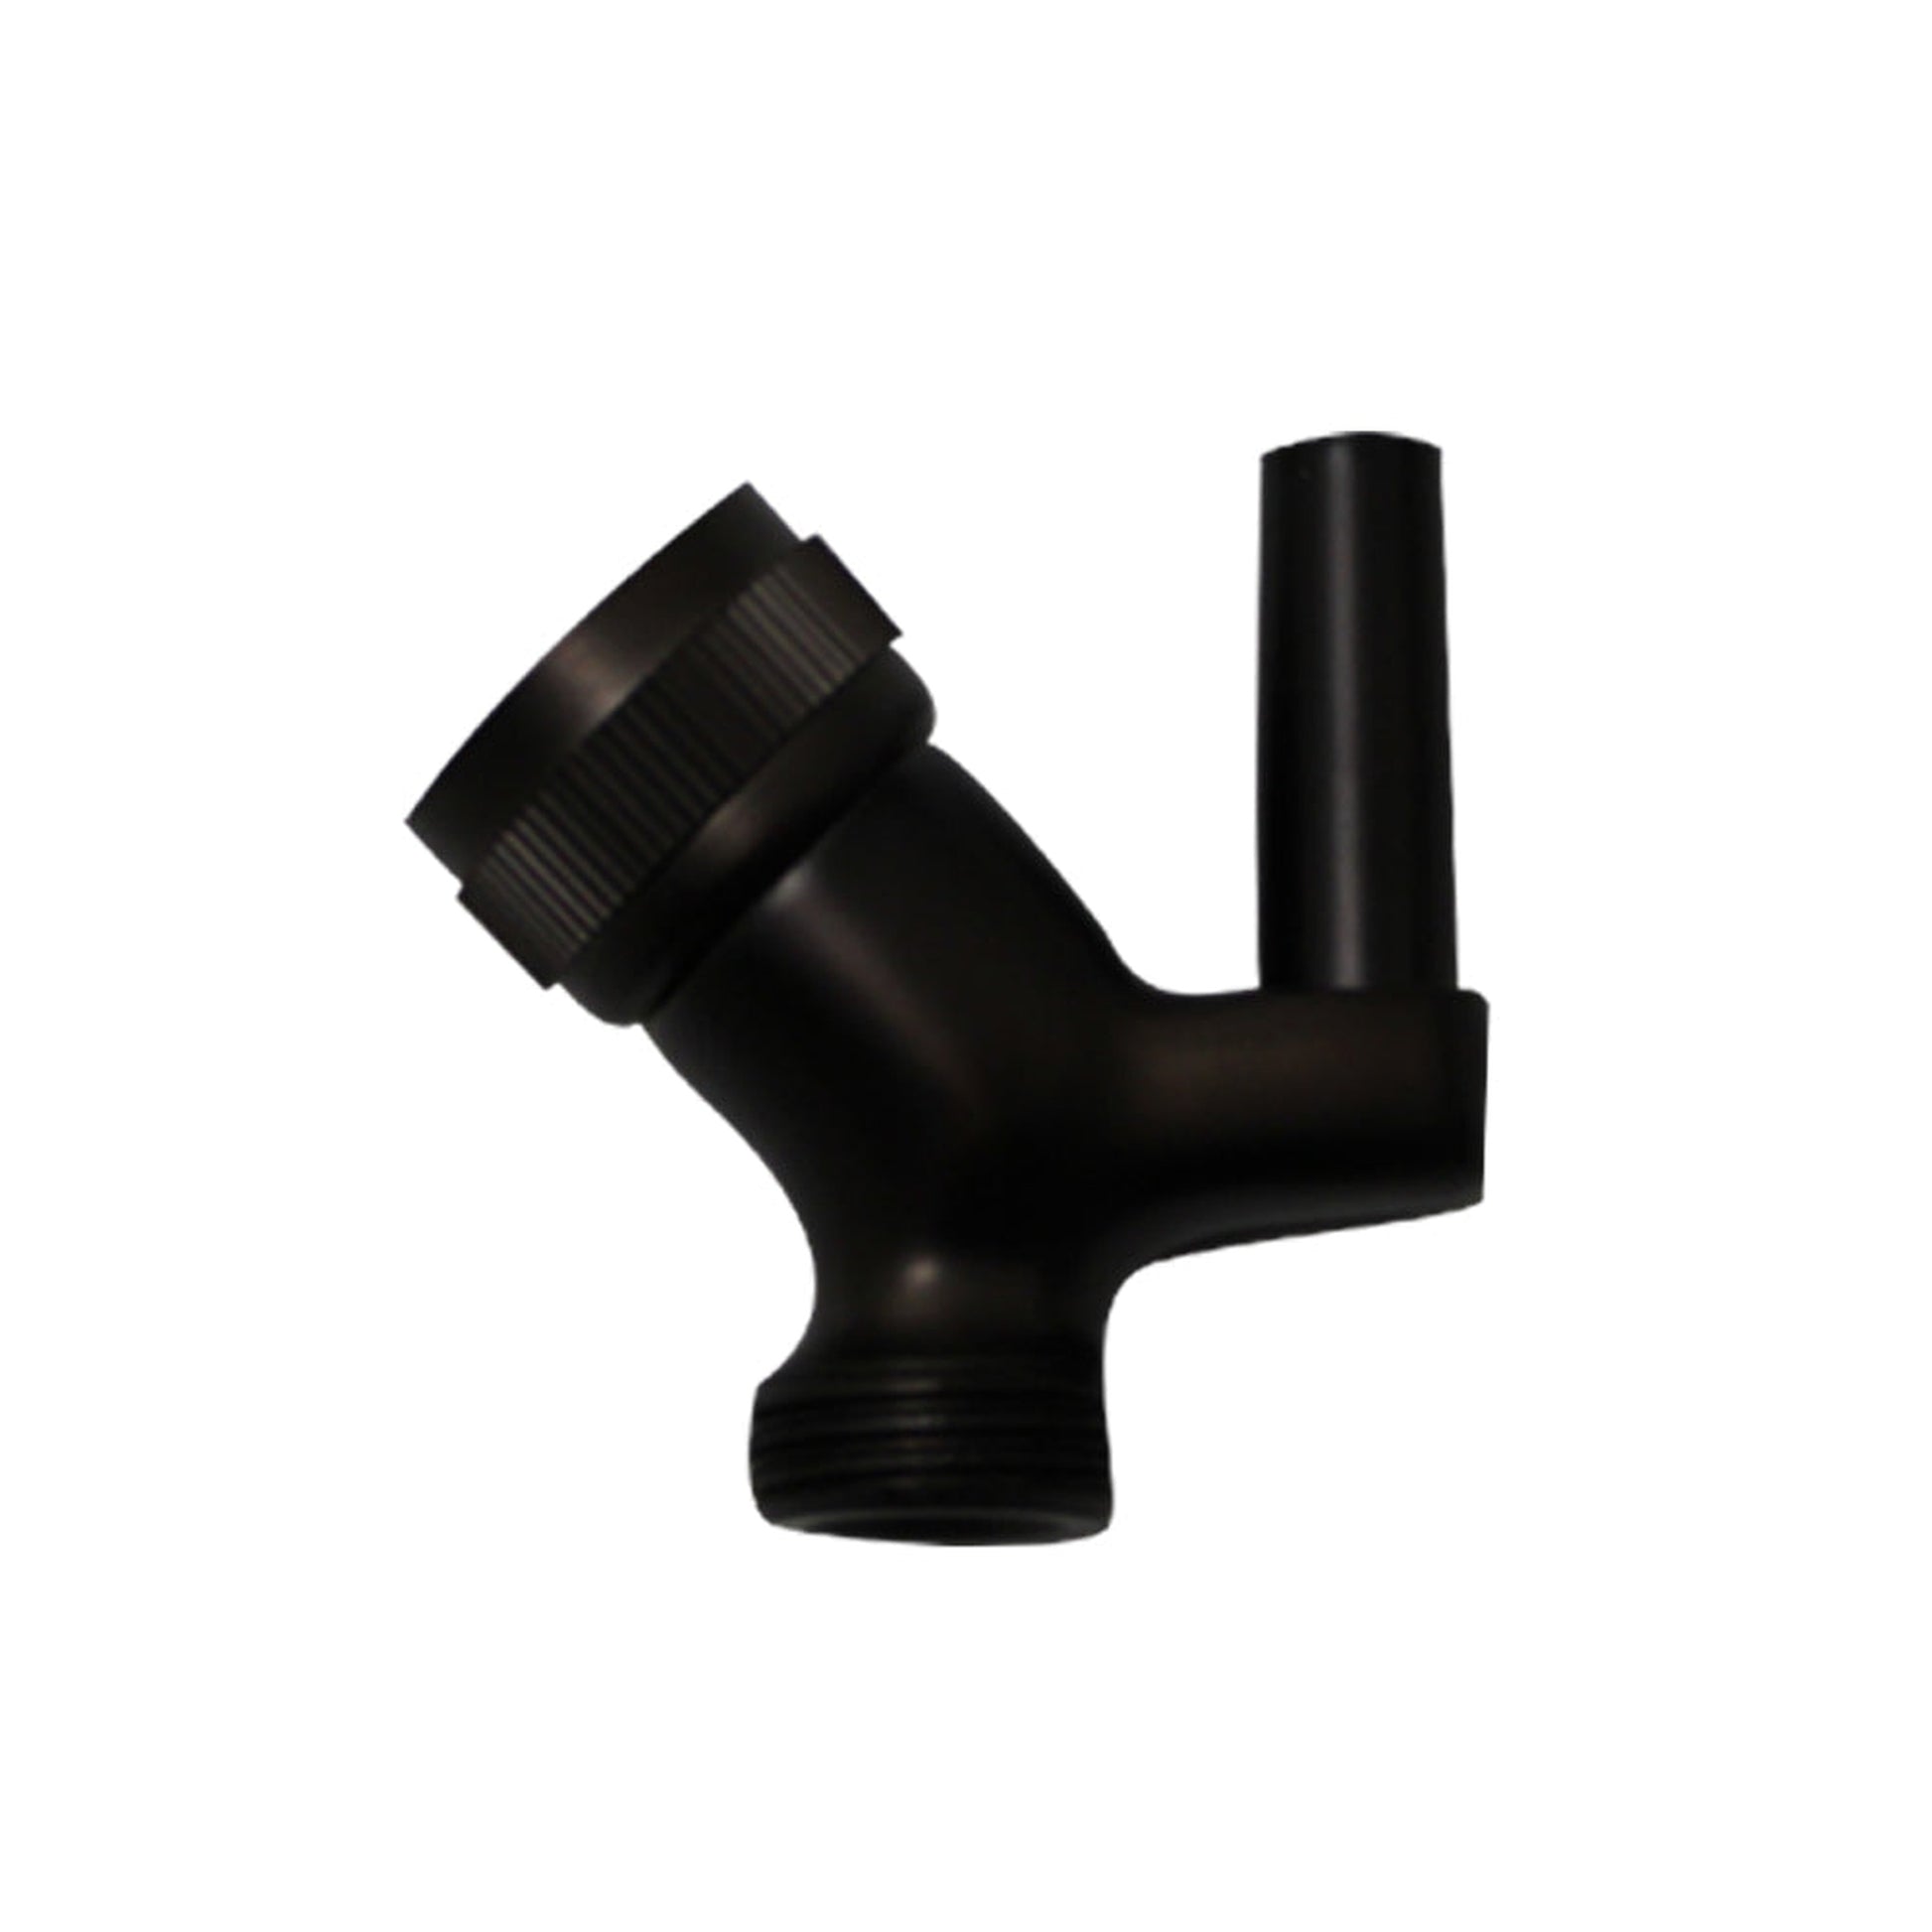 Whitehaus Showerhaus WH179A5-ORB Oil Rubbed Bronze Brass Swivel Hand Spray Connector